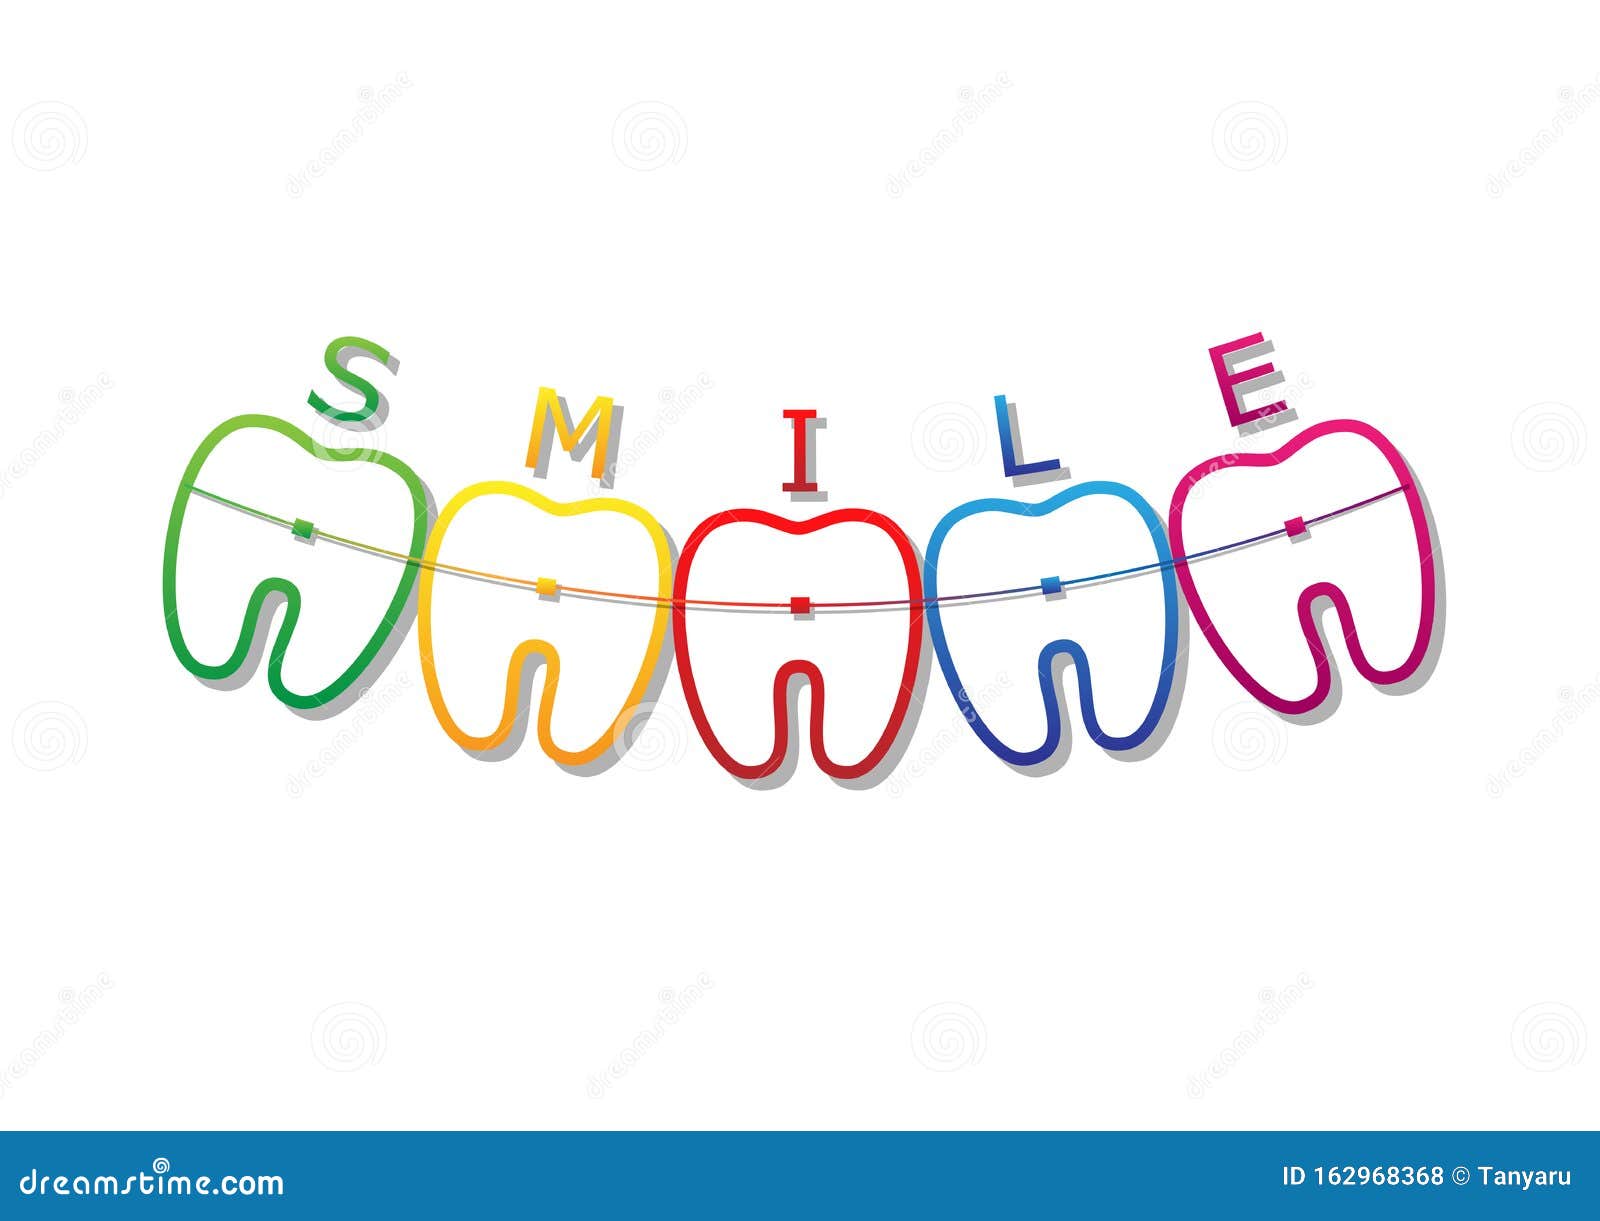 Download Teeth Symbols In Smile Shape With Braces And Smile Word On ...